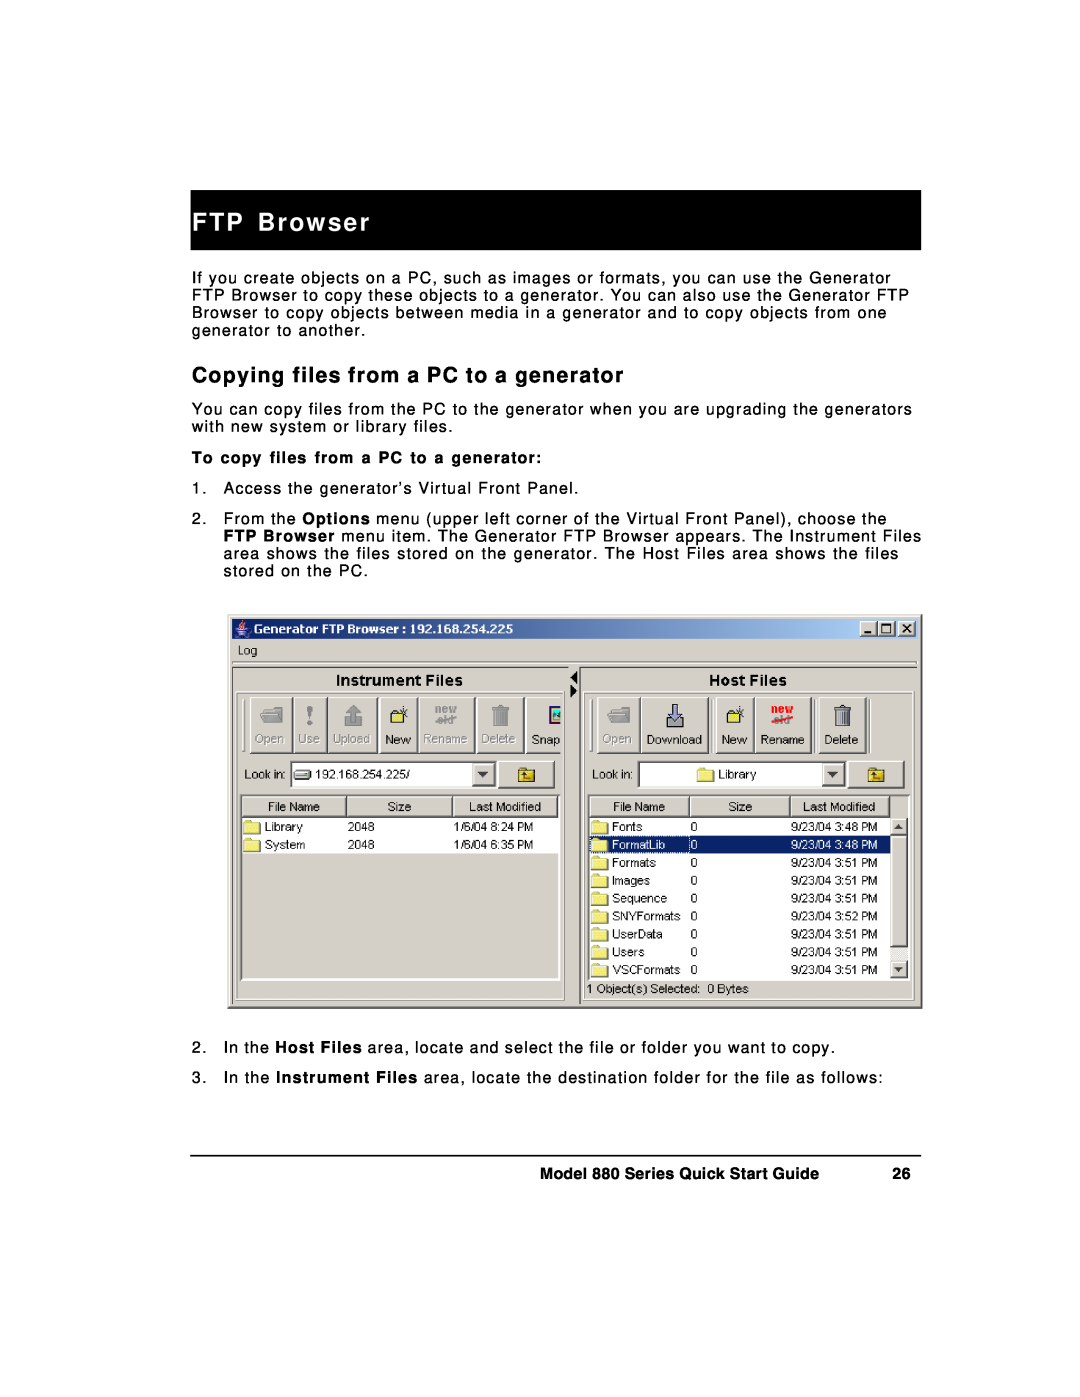 Quantum Data 880 quick start FTP Browser, Copying files from a PC to a generator, To copy files from a PC to a generator 